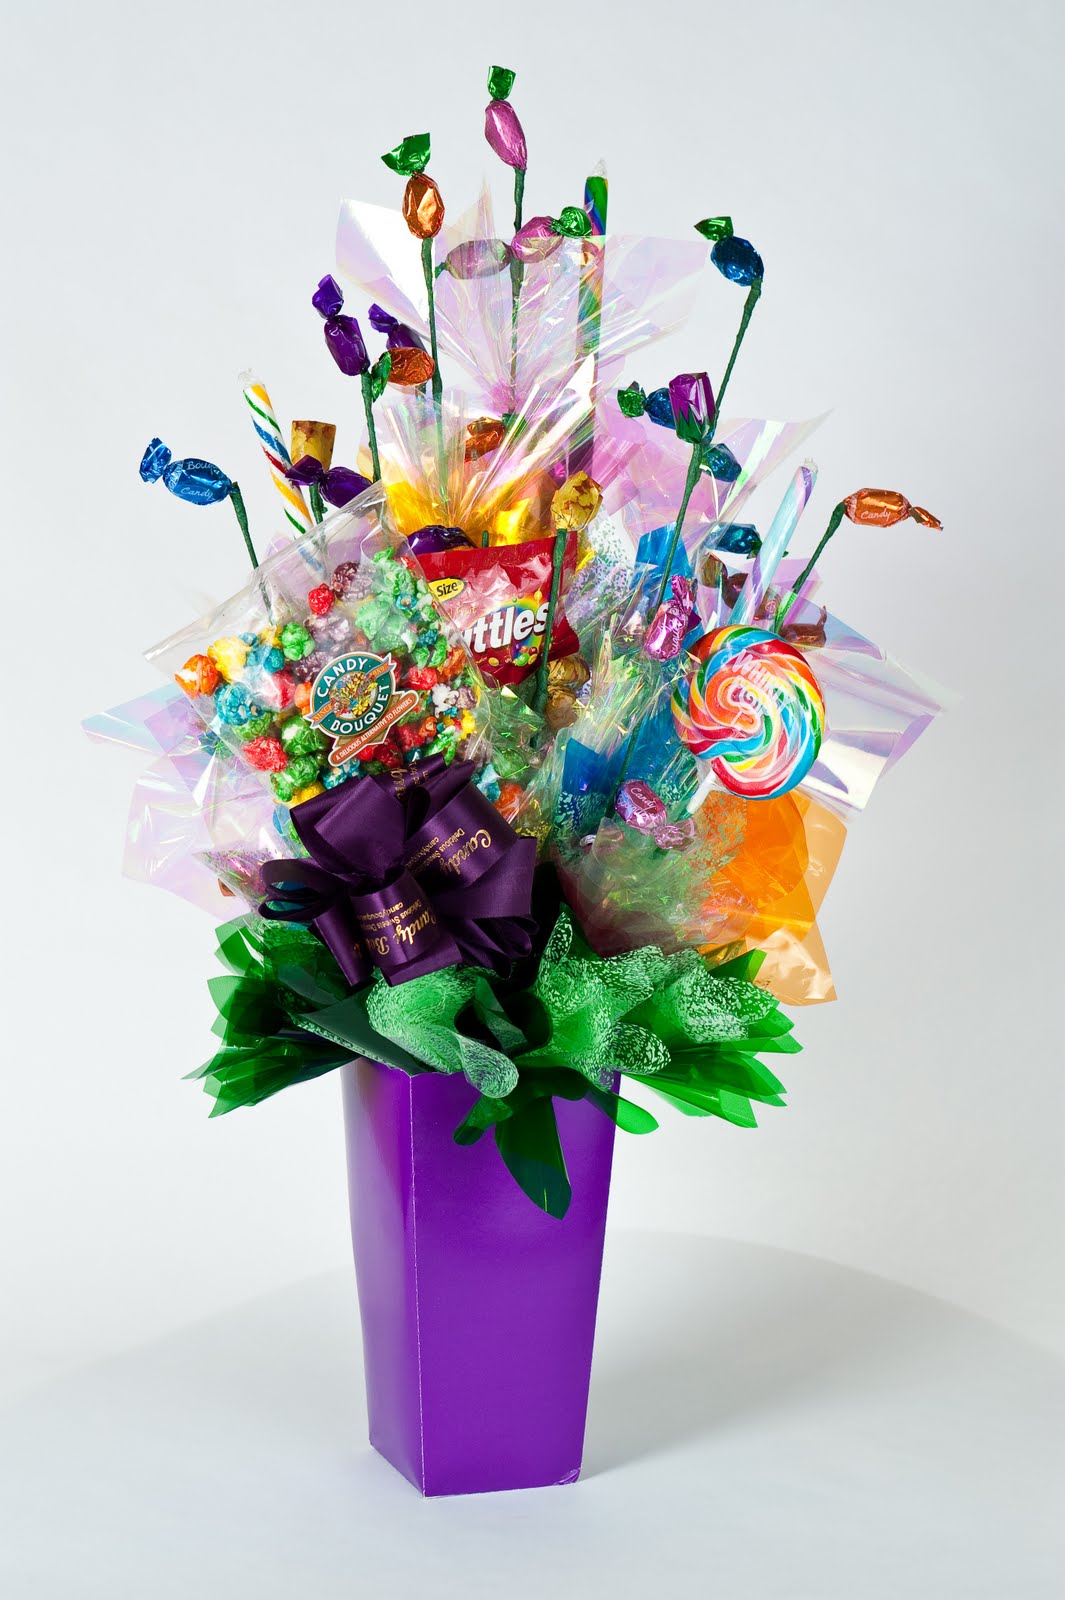 Candy Bouquet Soon In Doha: Grang3o Candy Bouquet